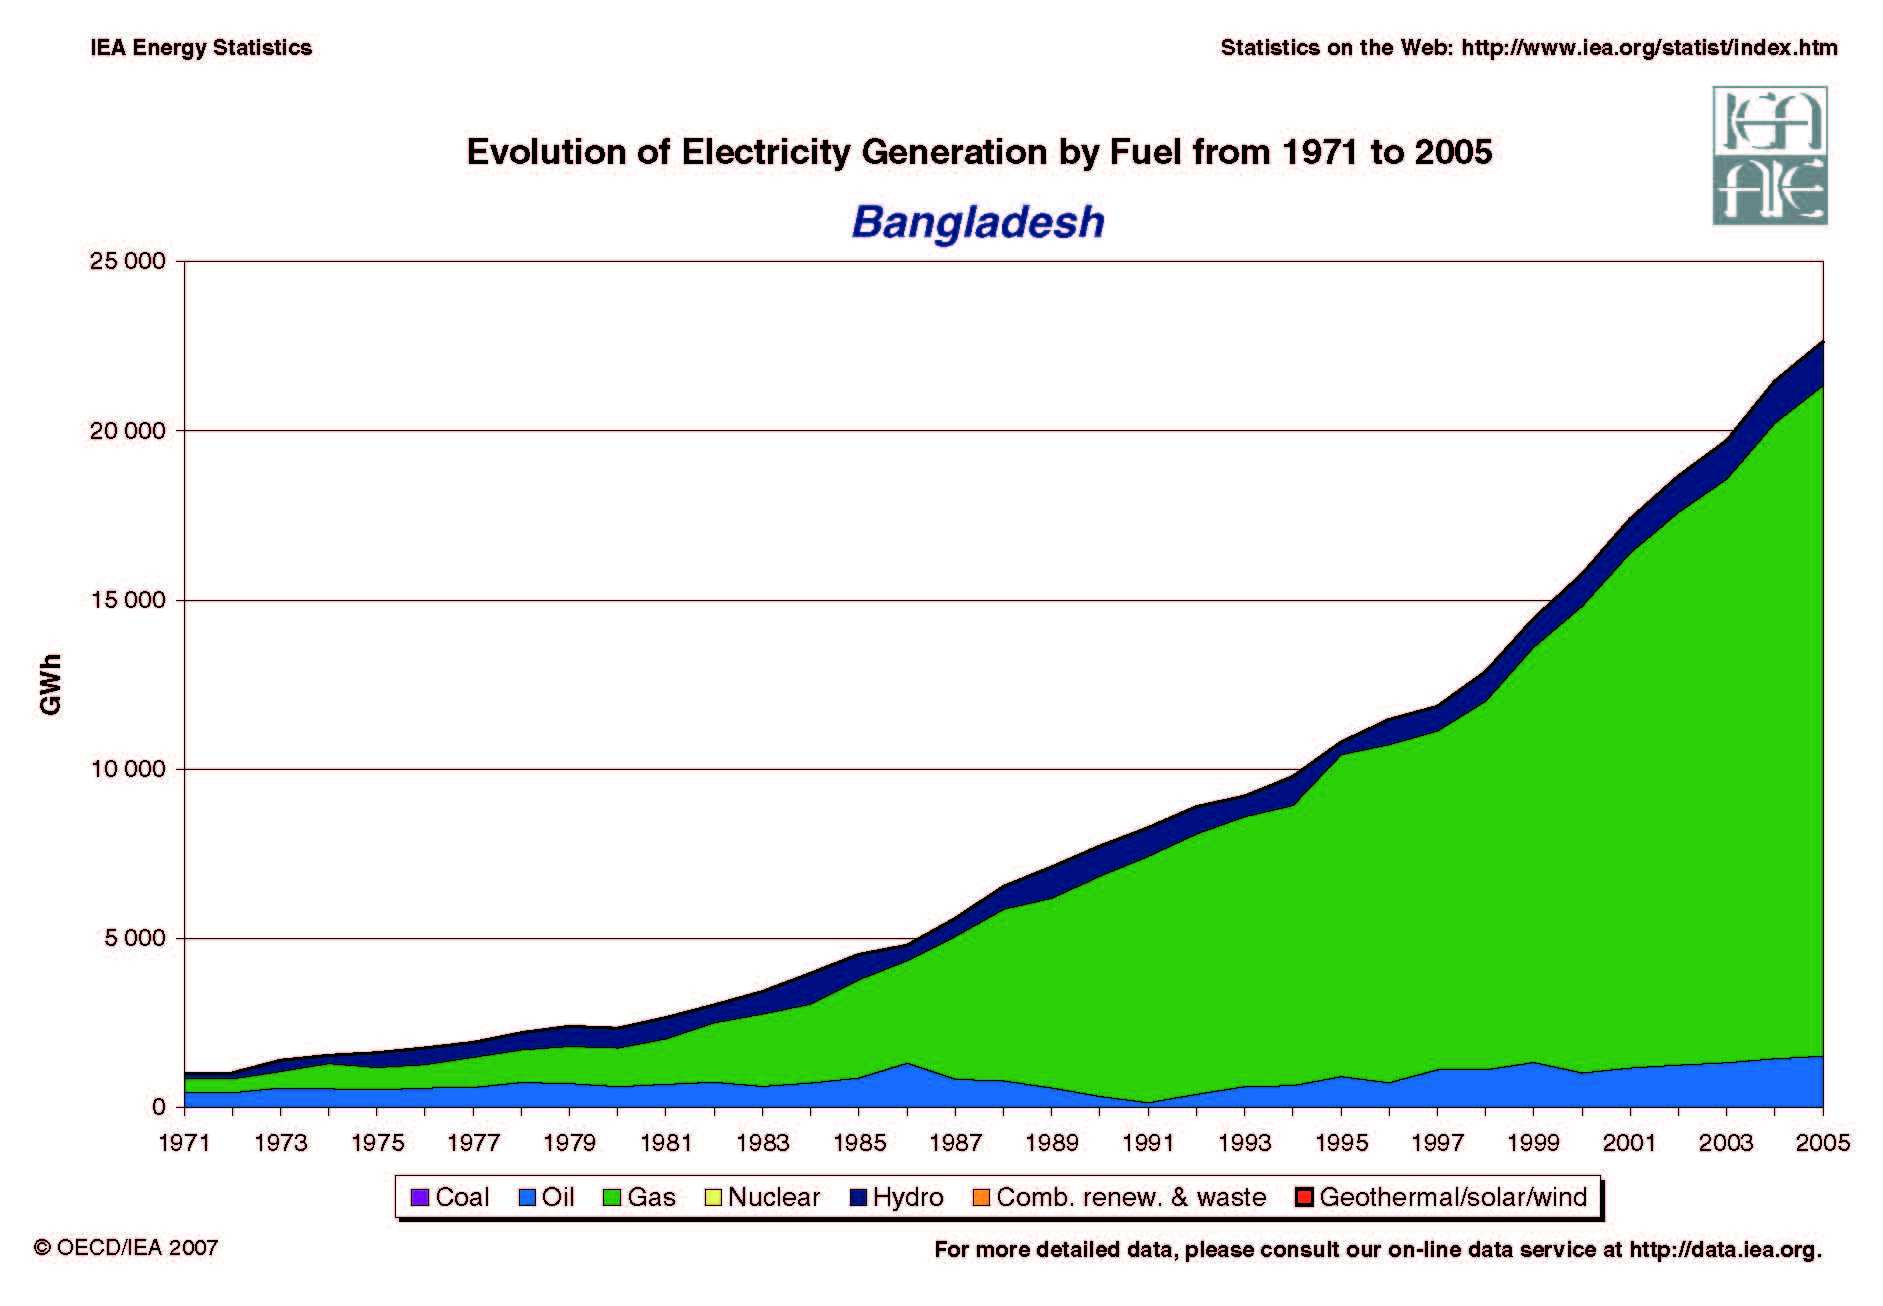 Bangladesh Evolution of Electricity Generation by Fuel 1971 - 2005